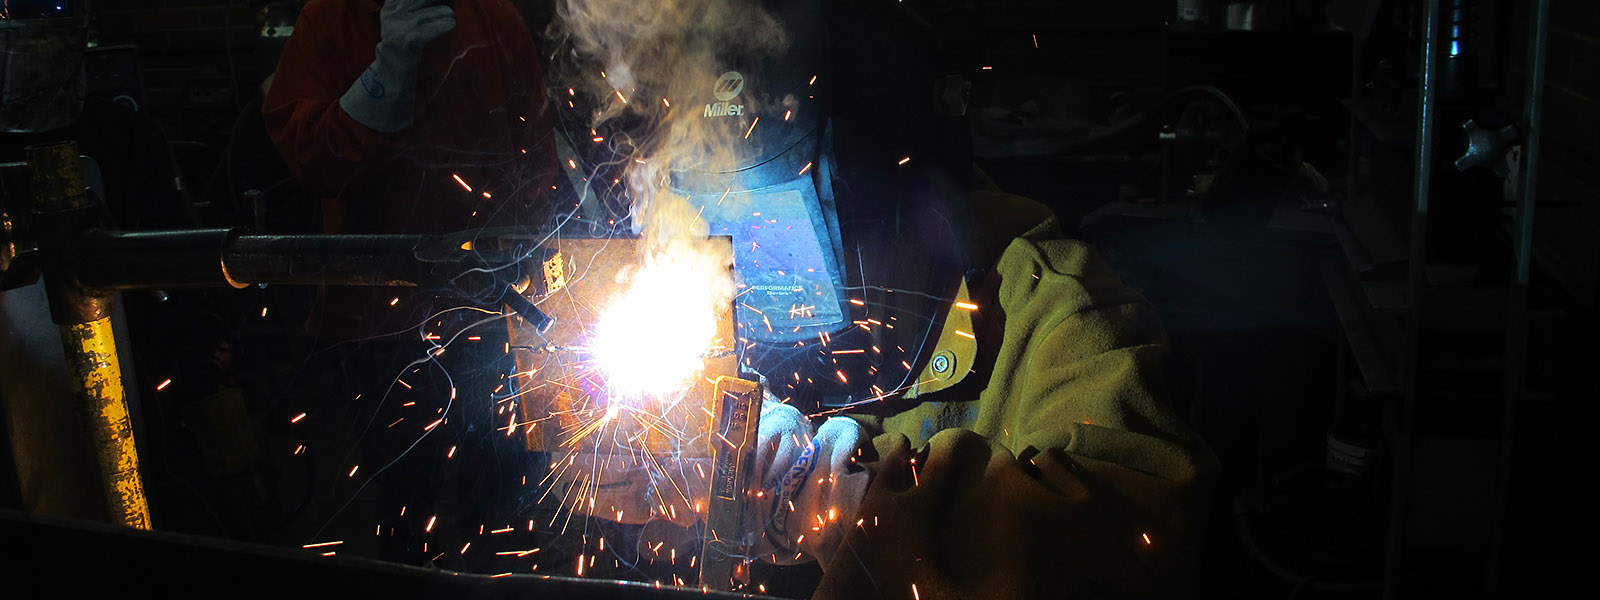 welder with mask on welding and sparks flying